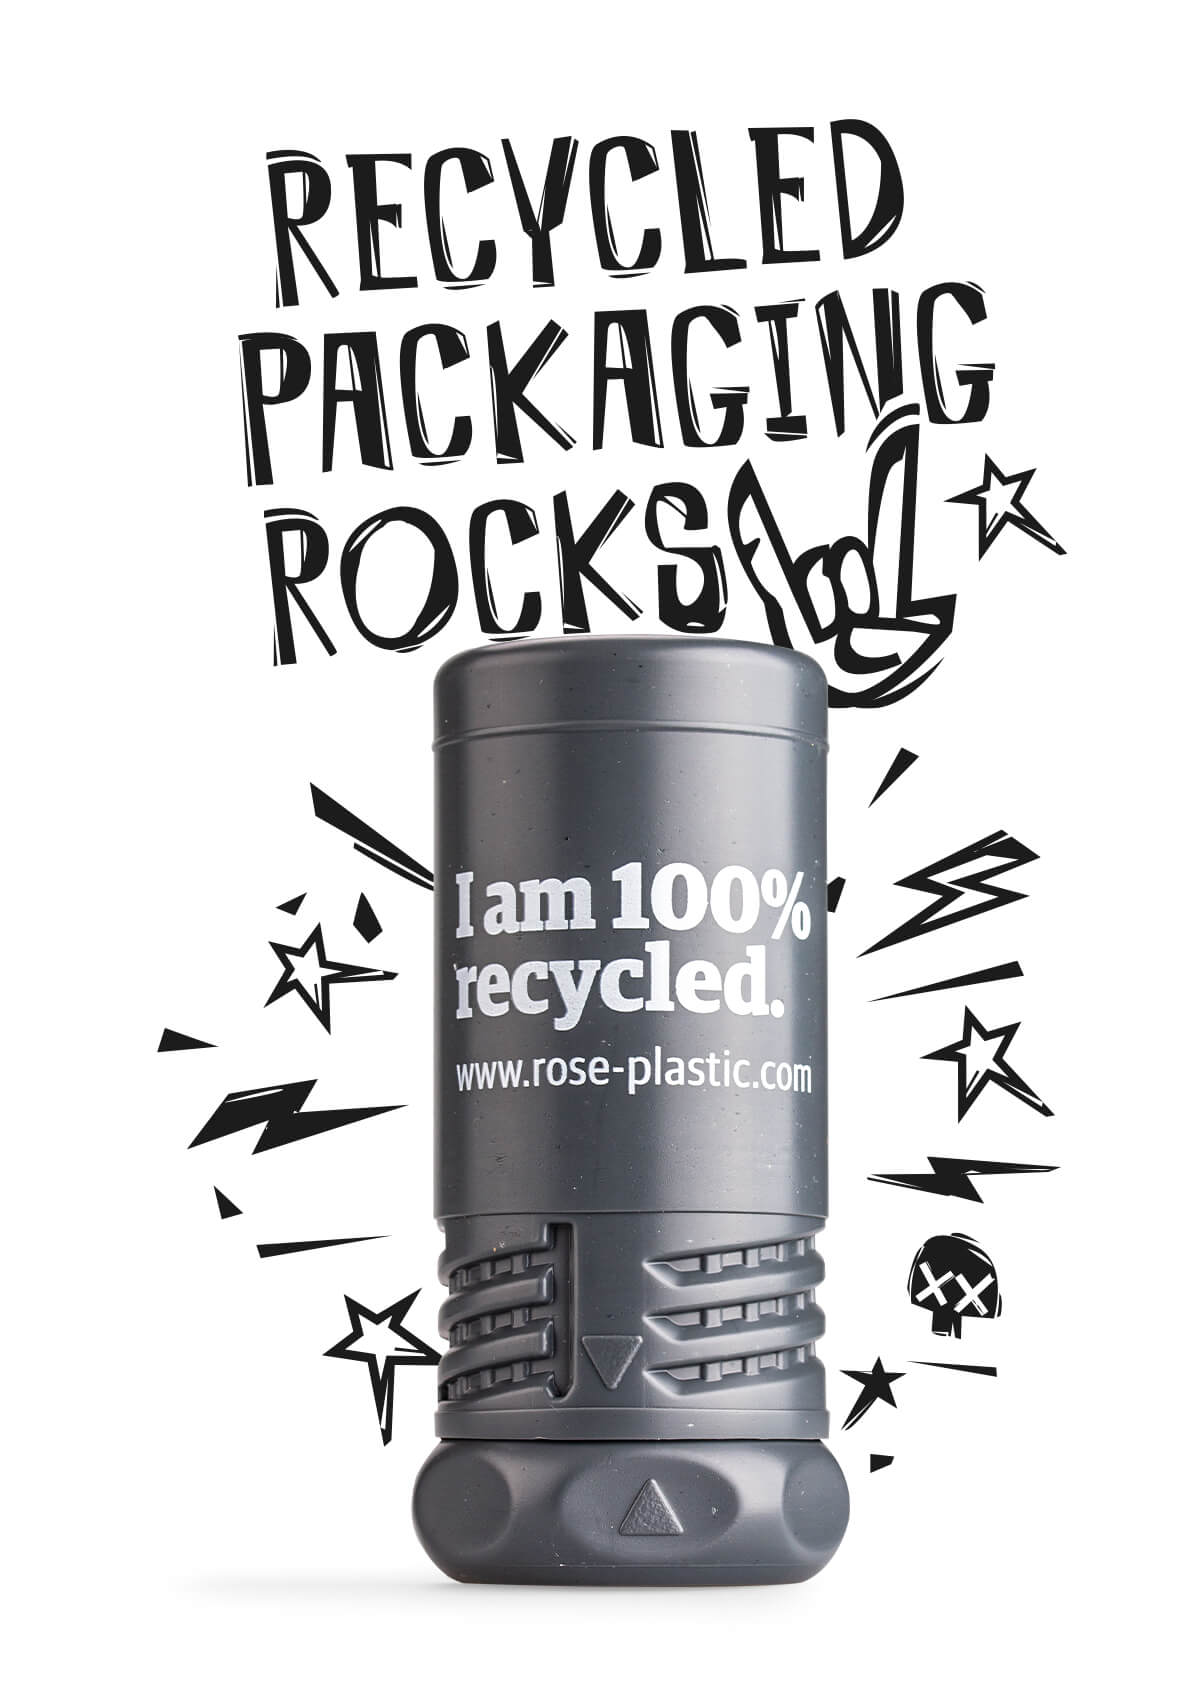 TwistPack Plus made from recycled material in front of a "recycling rocks" lettering